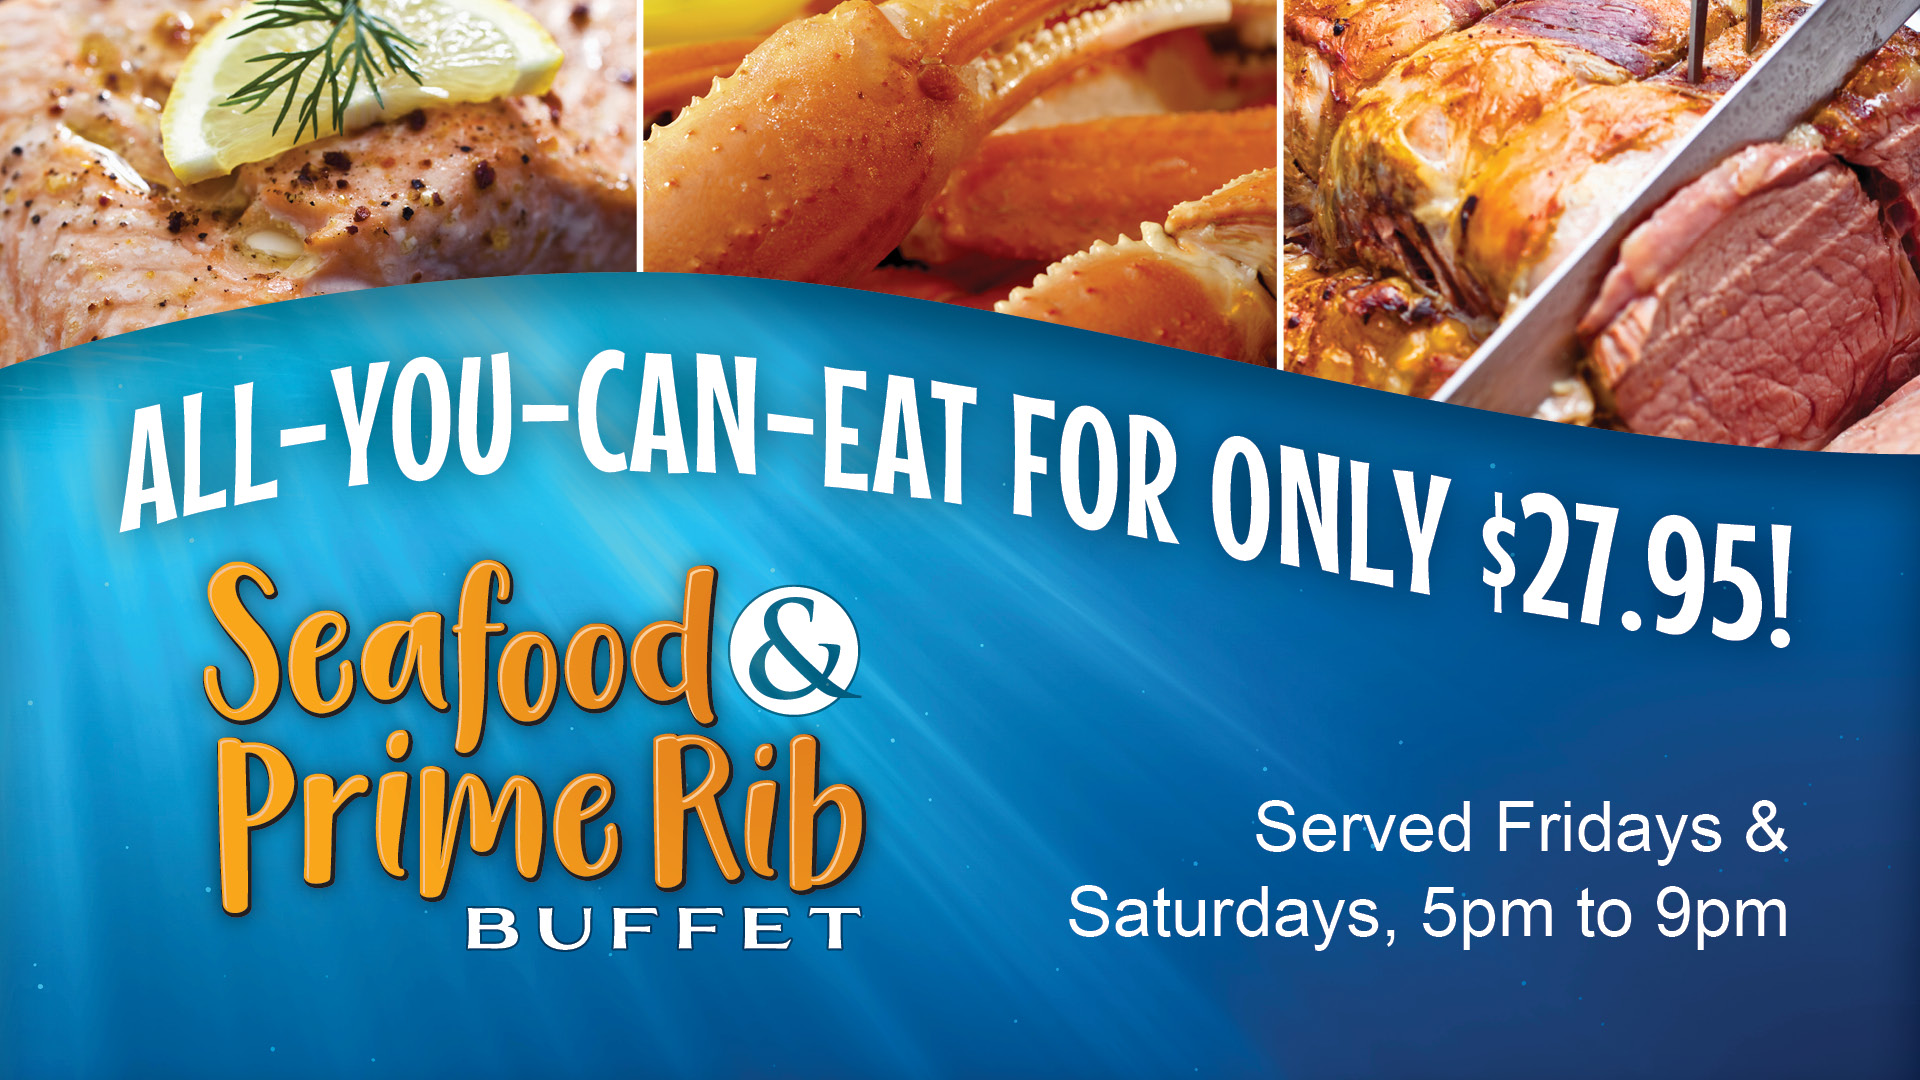 Seafood & Prime Rib Buffet: all-you-can-eat for only $27.95! Served Fridays & Saturdays, 5pm to 9pm.